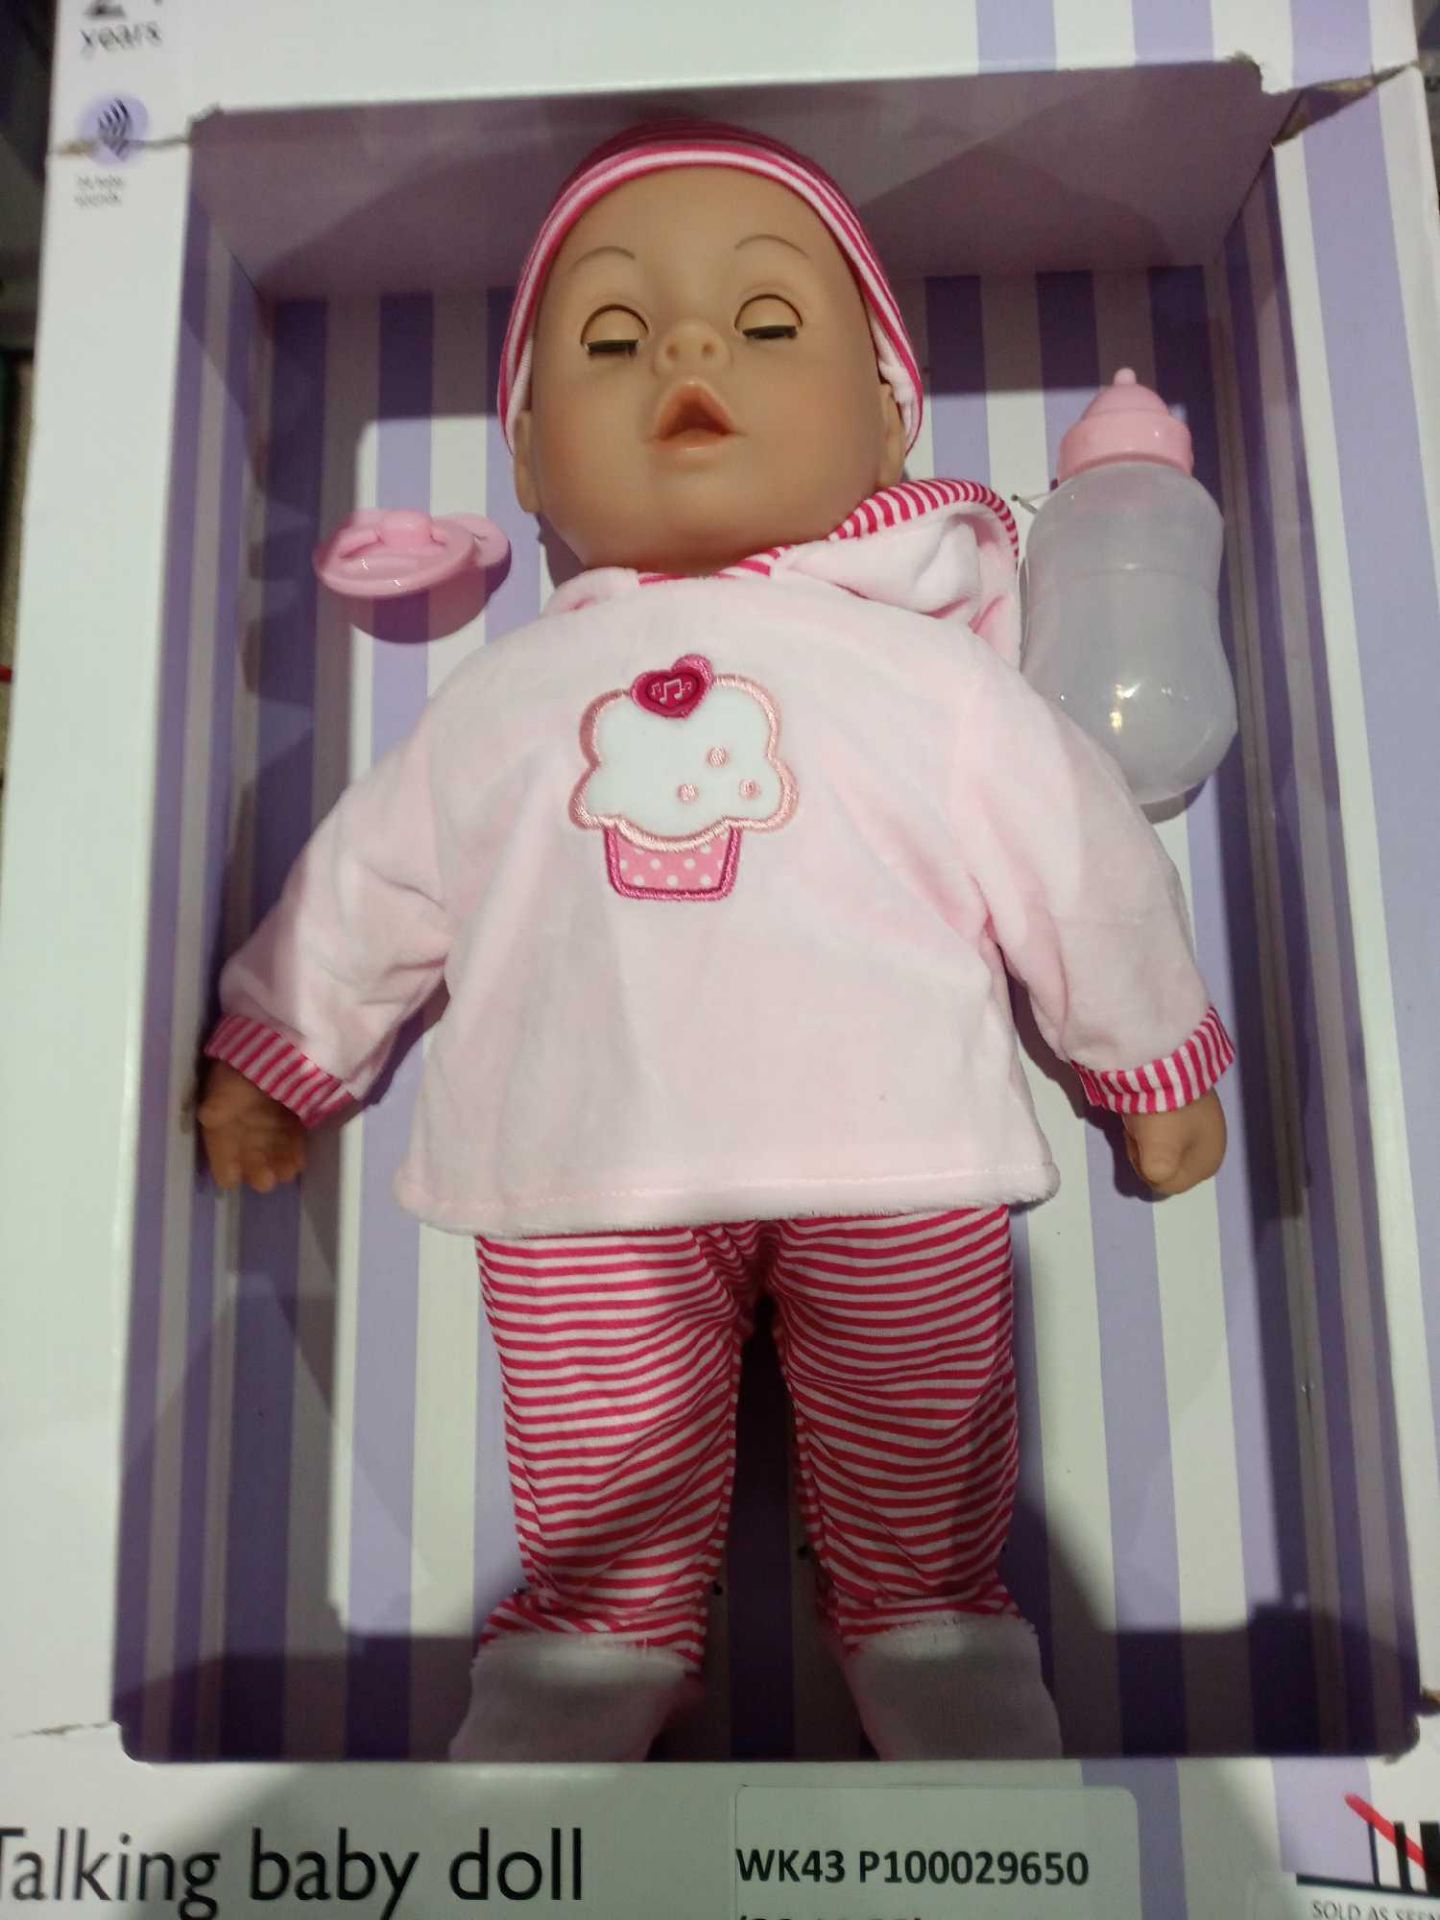 RRP £20 To £35 Each Boxed Assorted John Lewis Children's Toys To Include Talking Baby Dolls And Baby